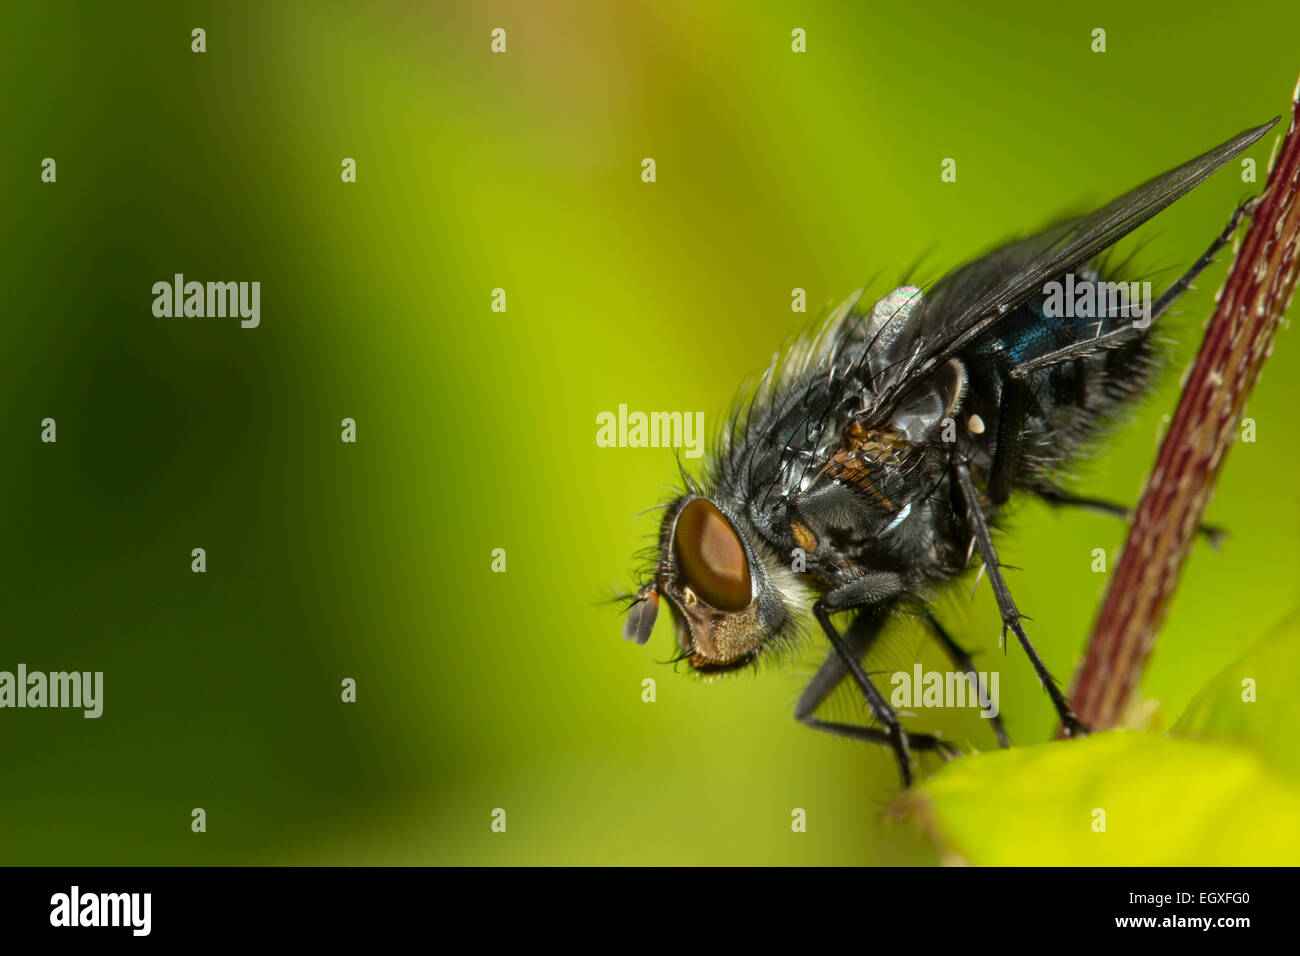 Macro shot with copyspace of Calliphora vicina, the bluebottle or blowfly Stock Photo